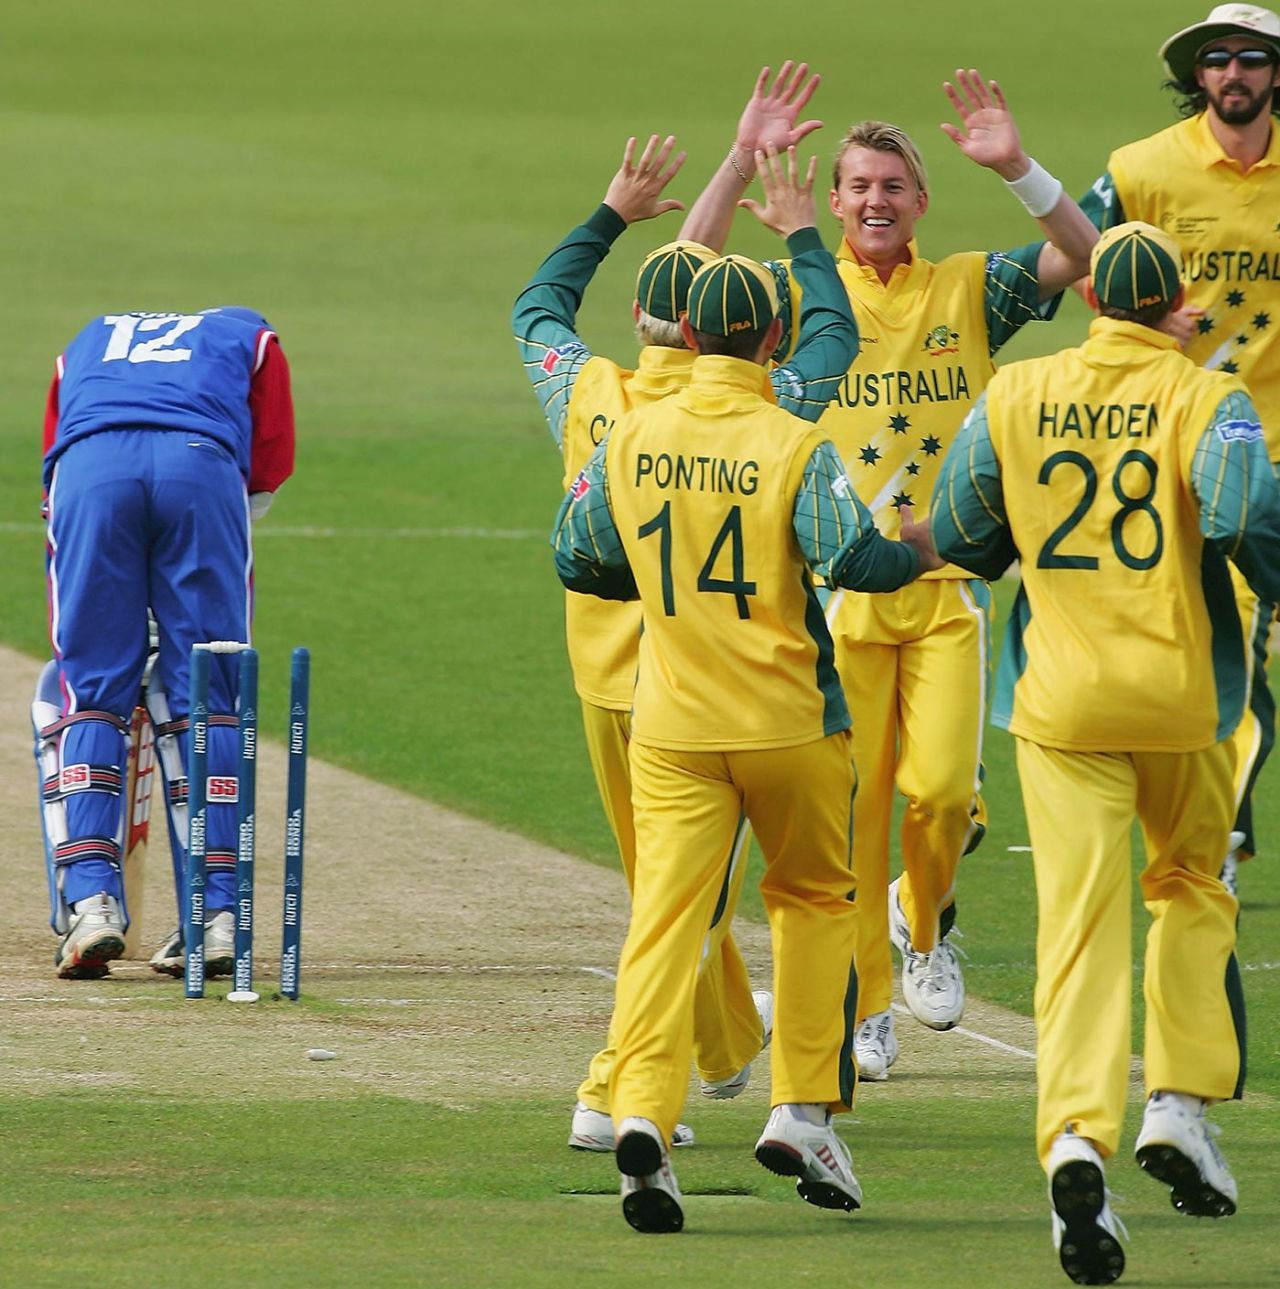 Brett Lee is congratulated after bowling Mark Johnson second ball, Australia v USA, 5th match, ICC Champions Trophy, Southampton, September 13, 2004